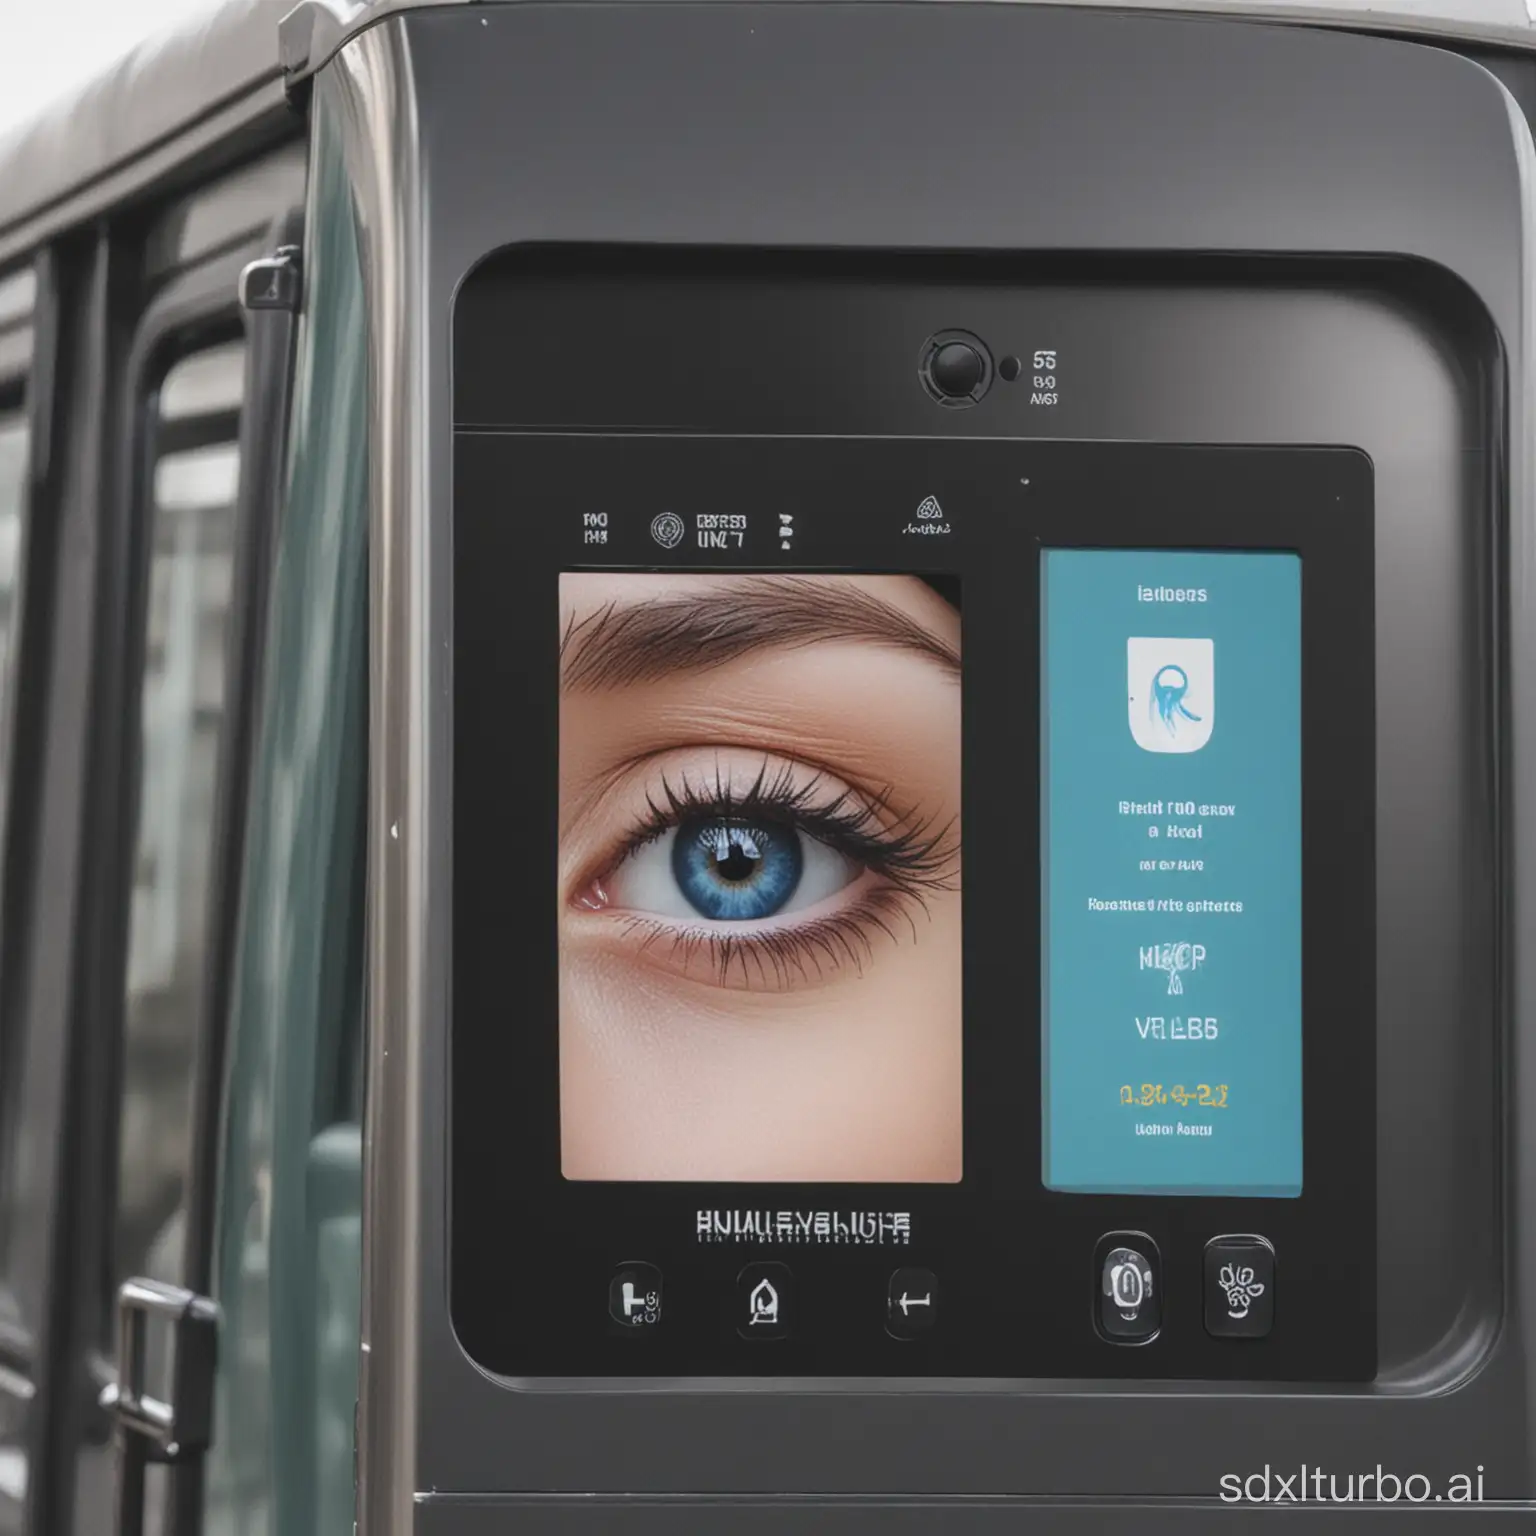 Alcohol detection machine with iris recognition installed on public vehicles